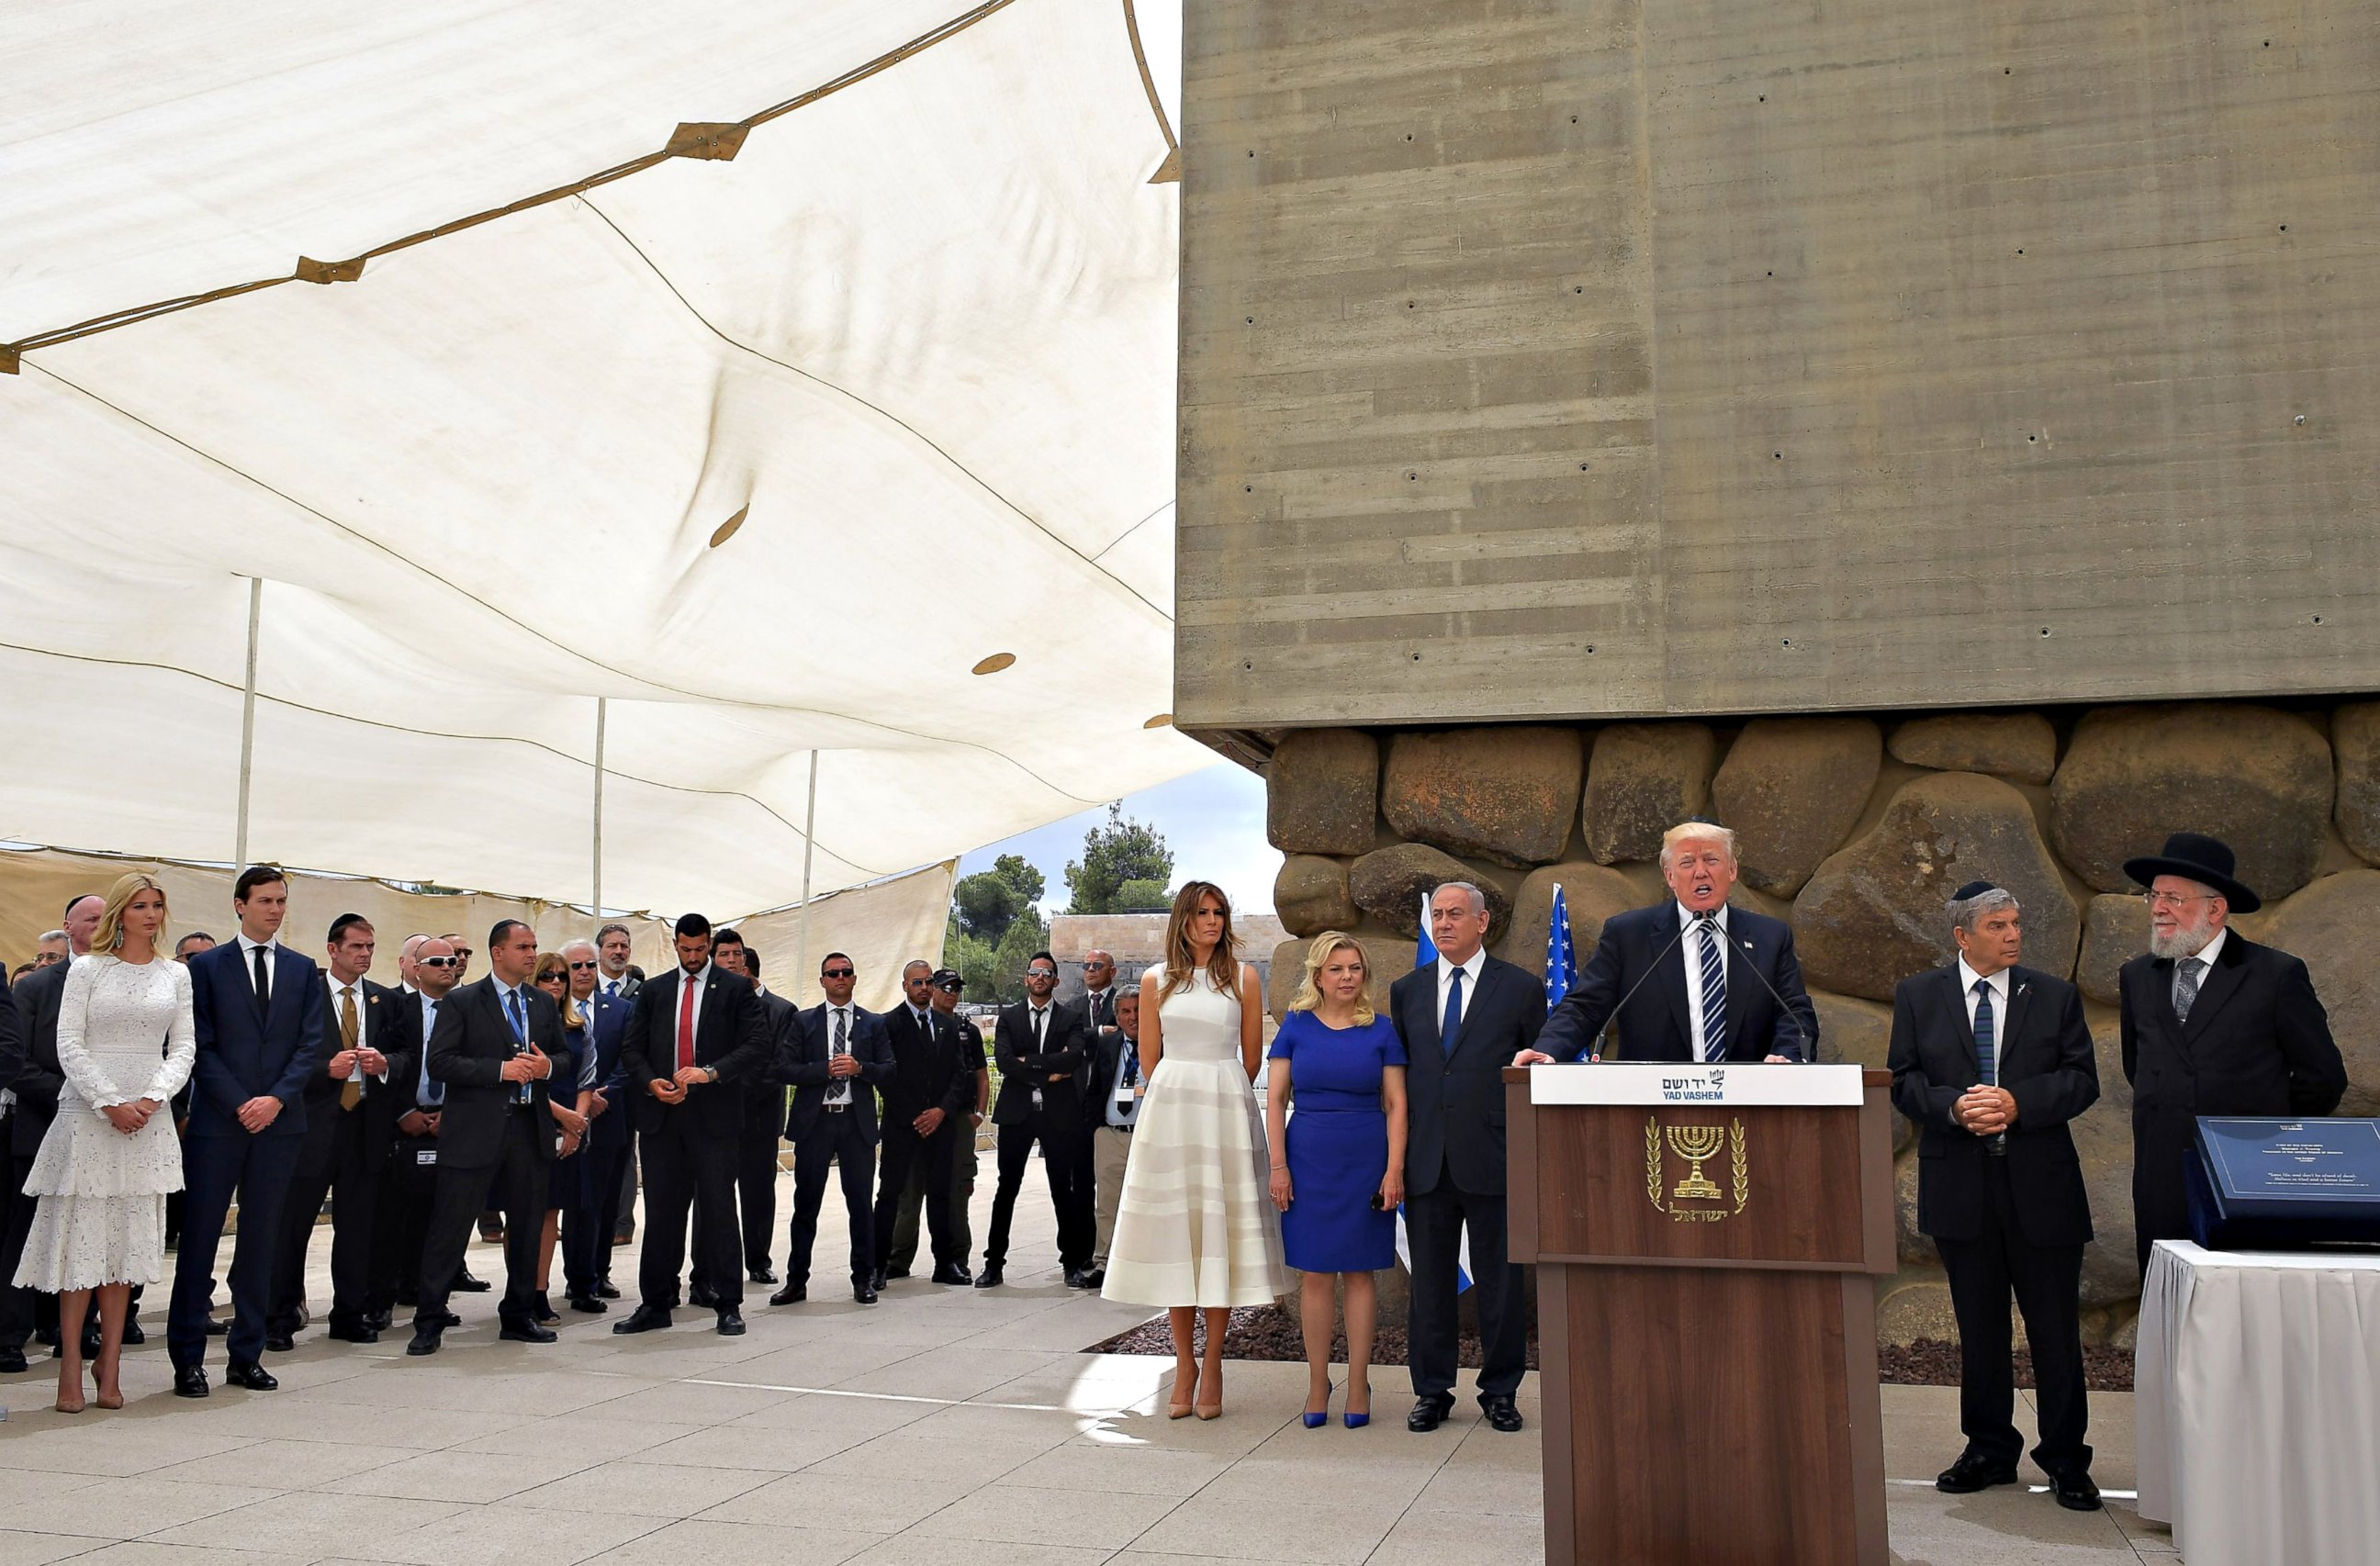 PHOTO: President Donald Trump speaks during a visit to the Yad Vashem Holocaust Memorial museum, commemorating the six million Jews killed by the Nazis during World War II, May 23, 2017, in Jerusalem.